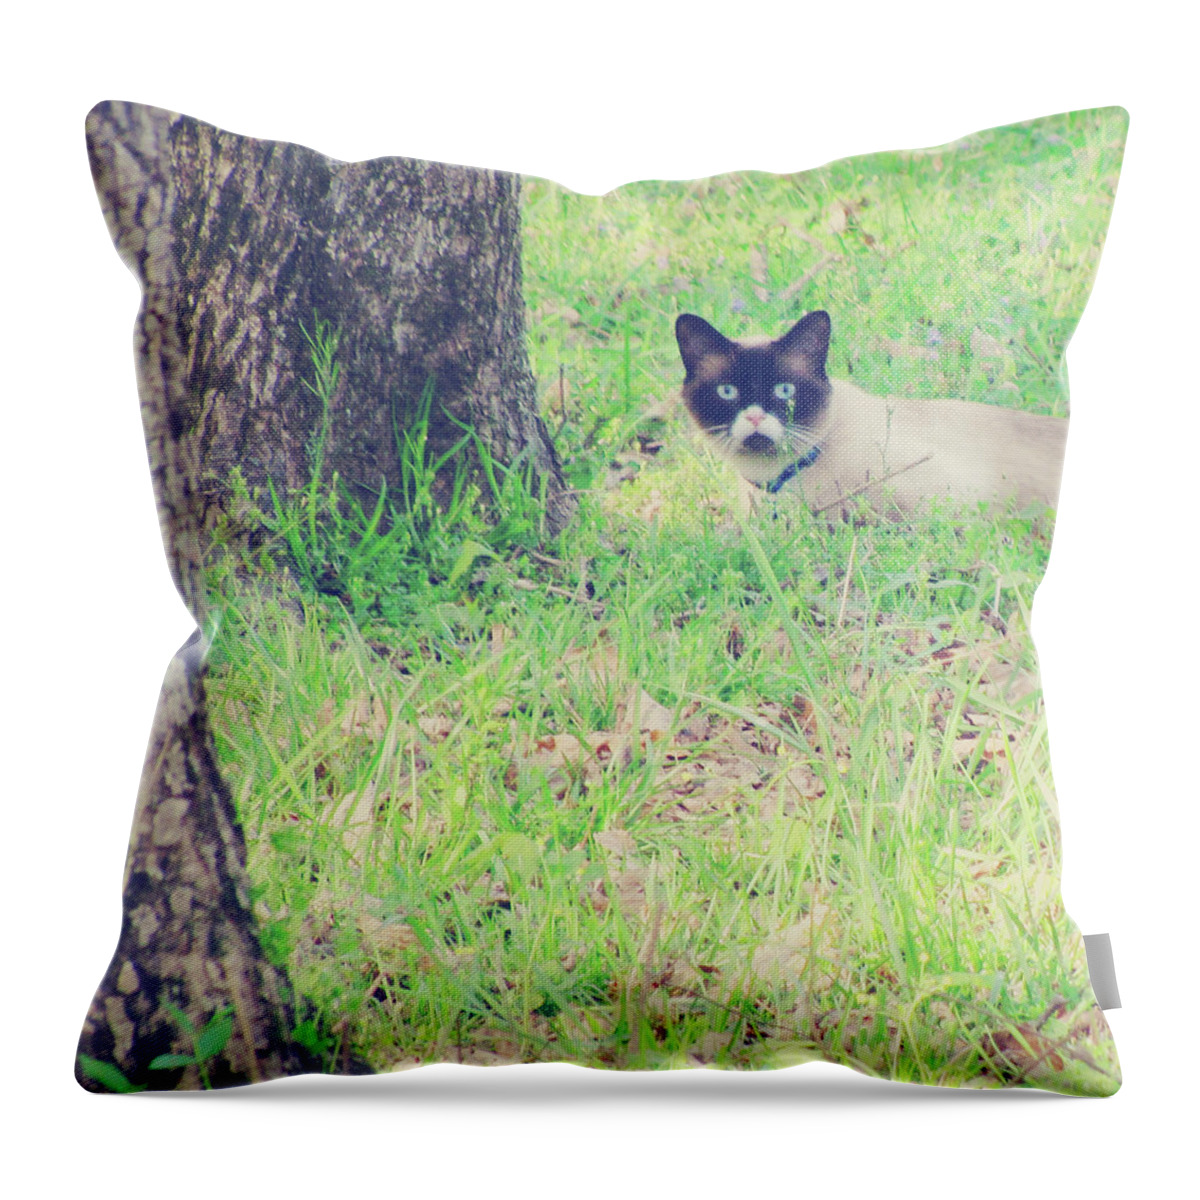 Siamese Cat Throw Pillow featuring the photograph The Mighty Hunter by Amy Tyler